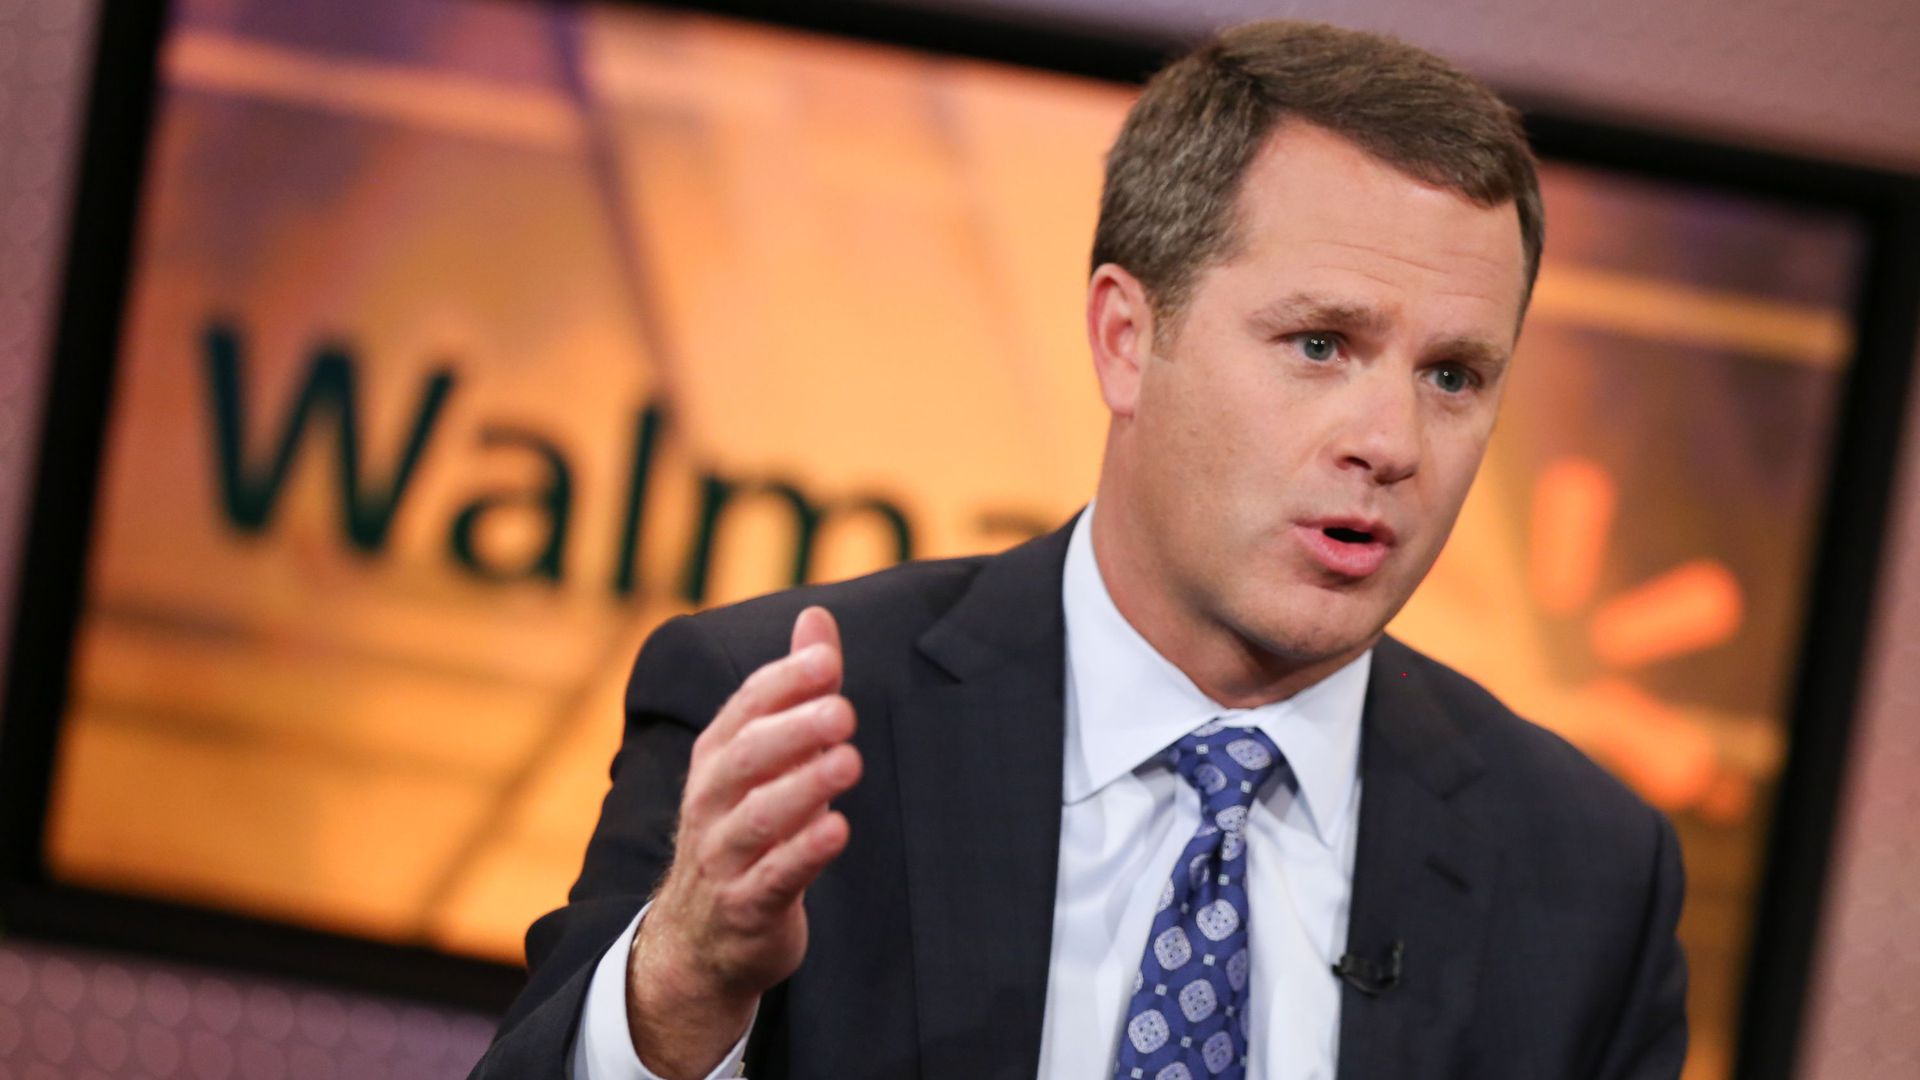 Doug McMillon is the CEO of which company?